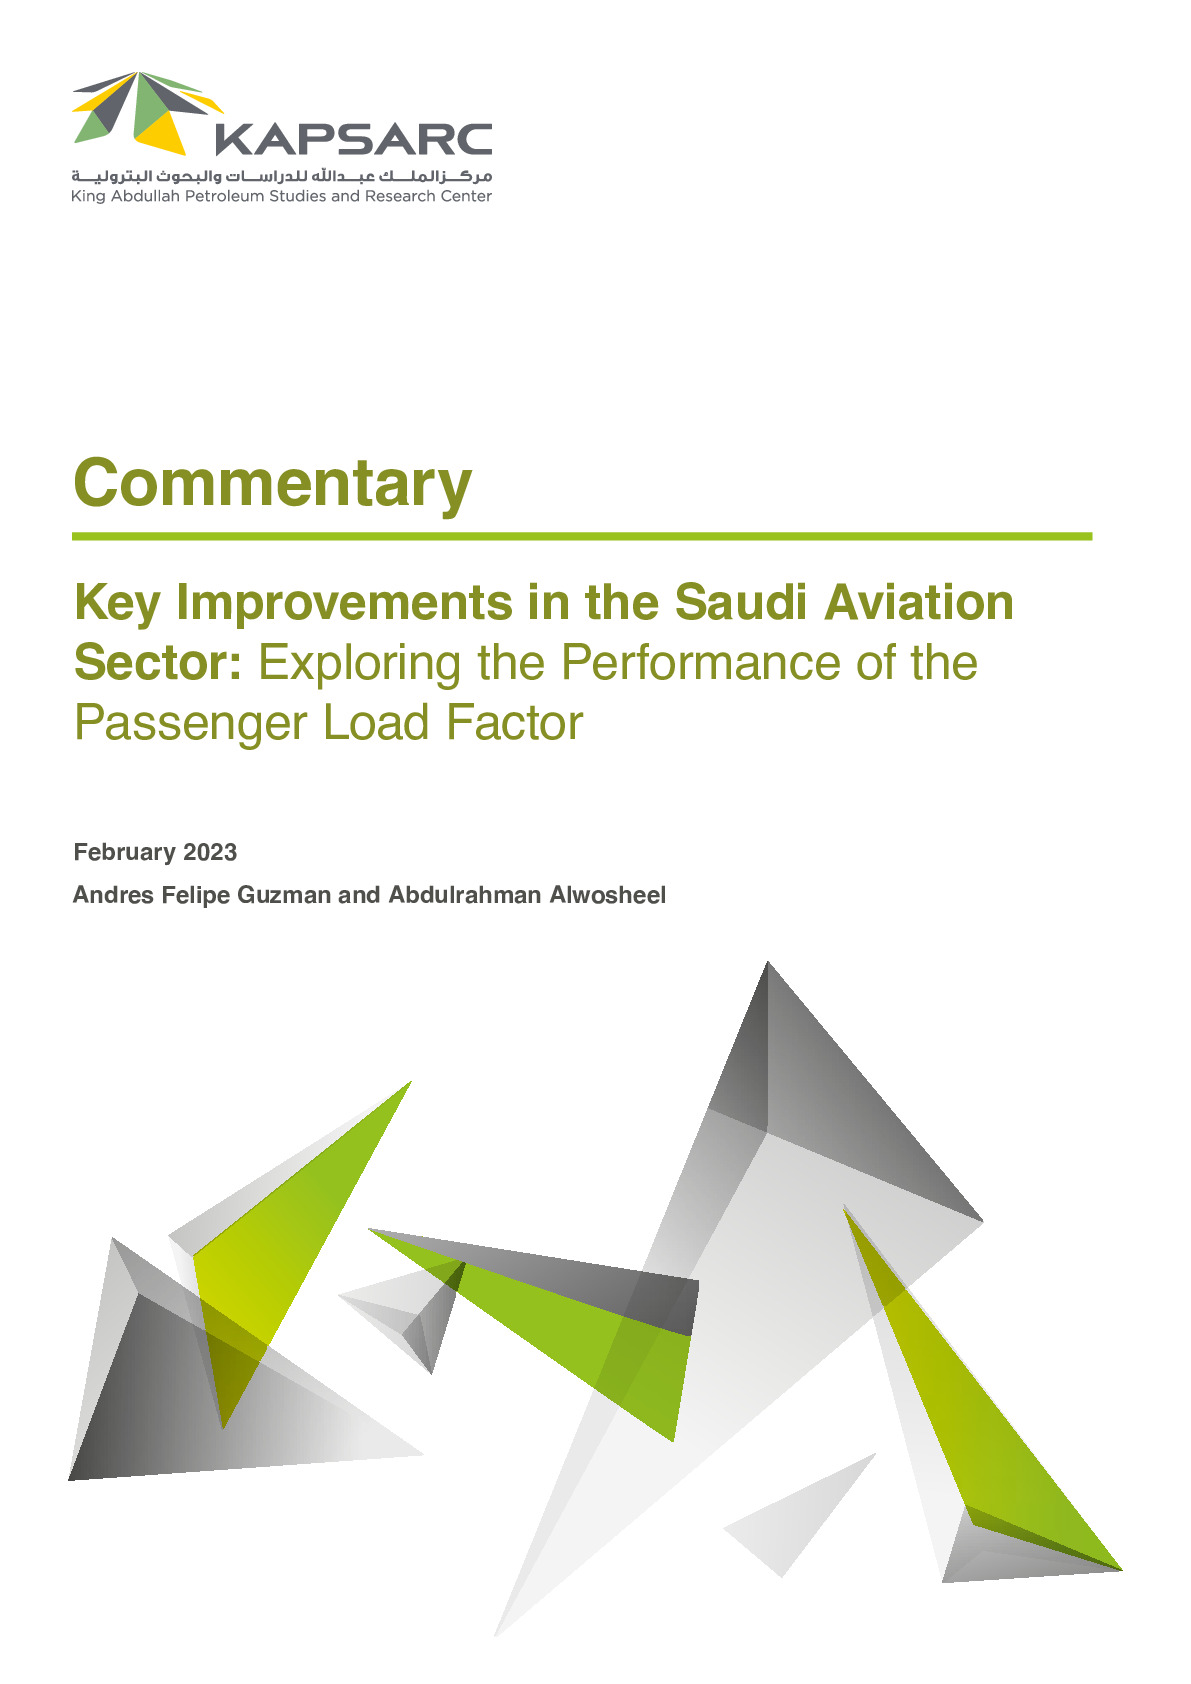 Key Improvements in the Saudi Aviation Sector: Exploring the Performance of the Passenger Load Factor